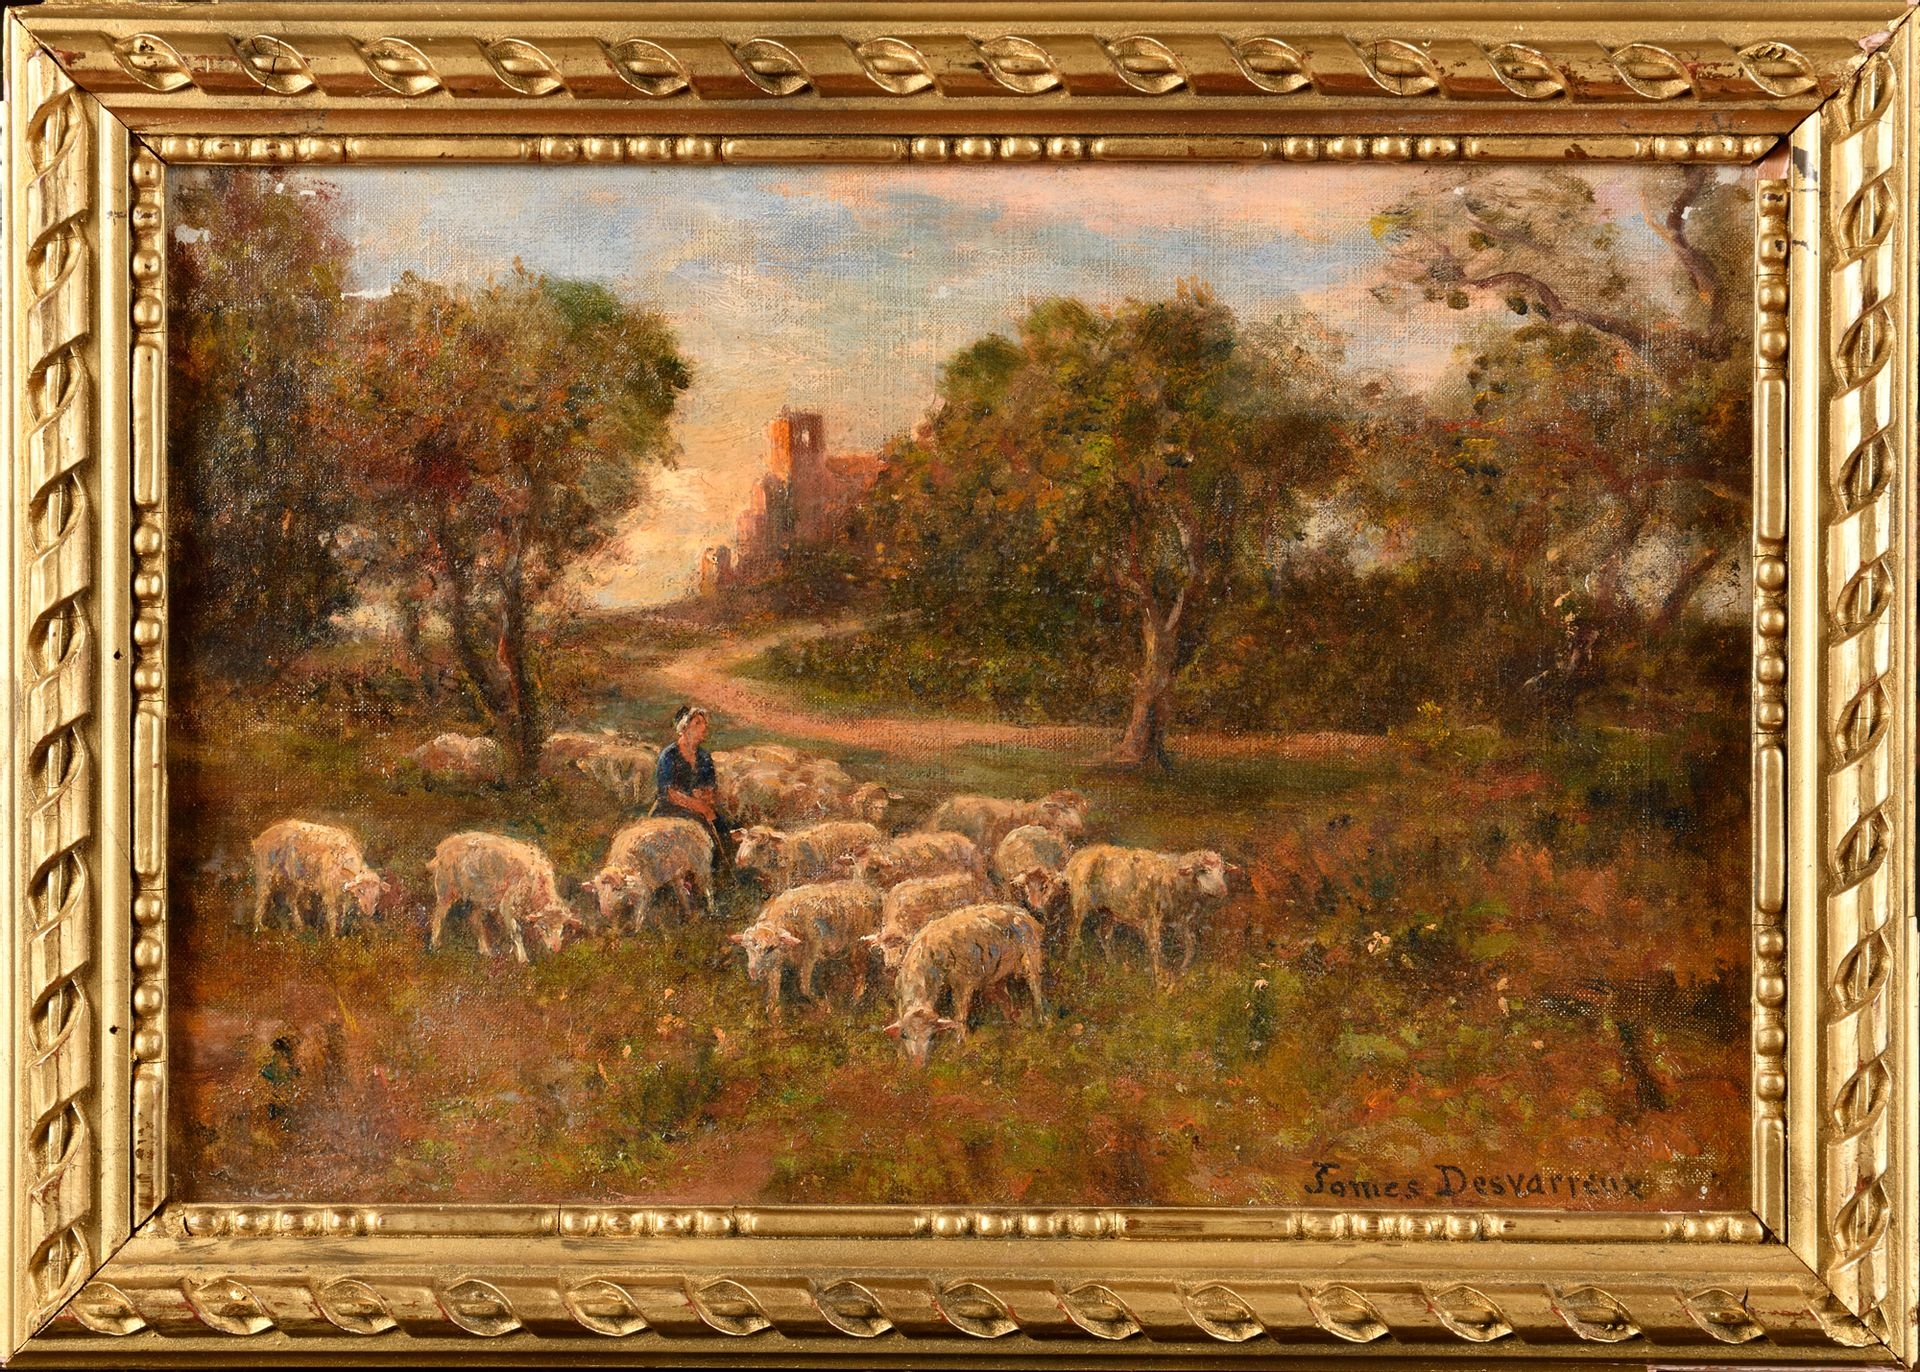 Shepherdess and her sheep by Raymond Desvarreux